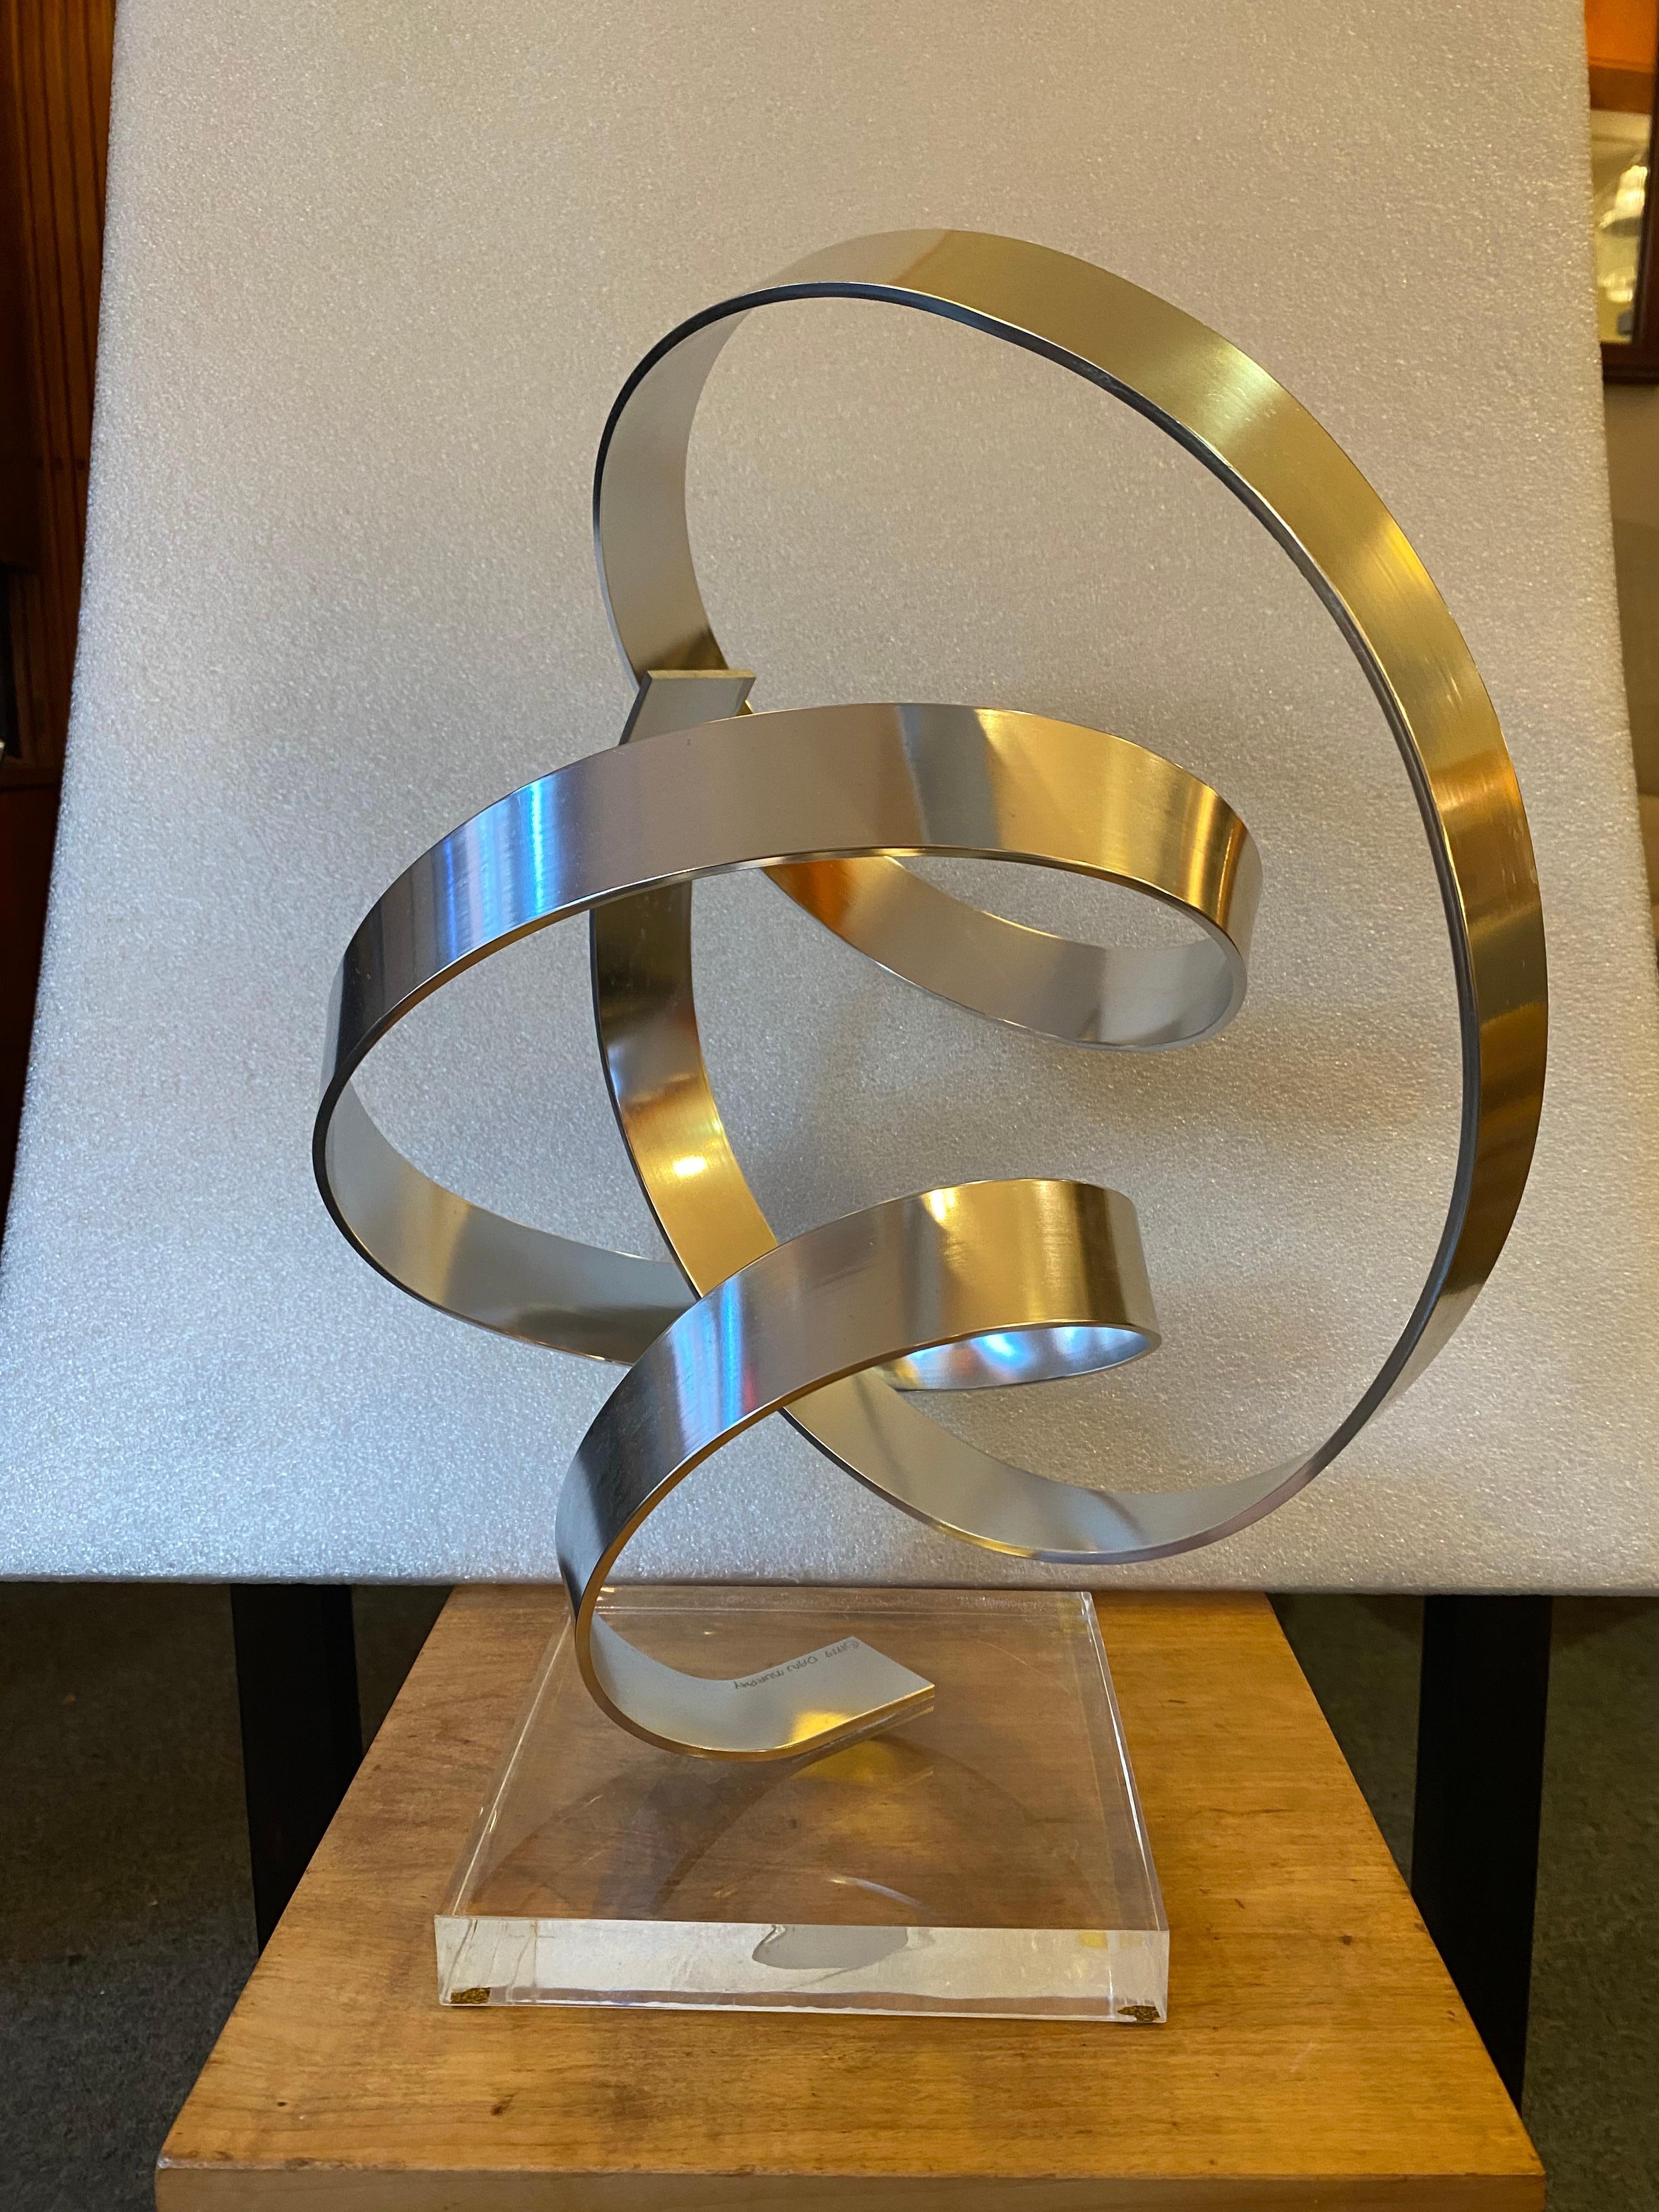 Dan Murphy Aluminum Sculpture.  Curly Twisting bands of aluminum form a sculpture that sits on a lucite base.  Signature to aluminum at bottom.